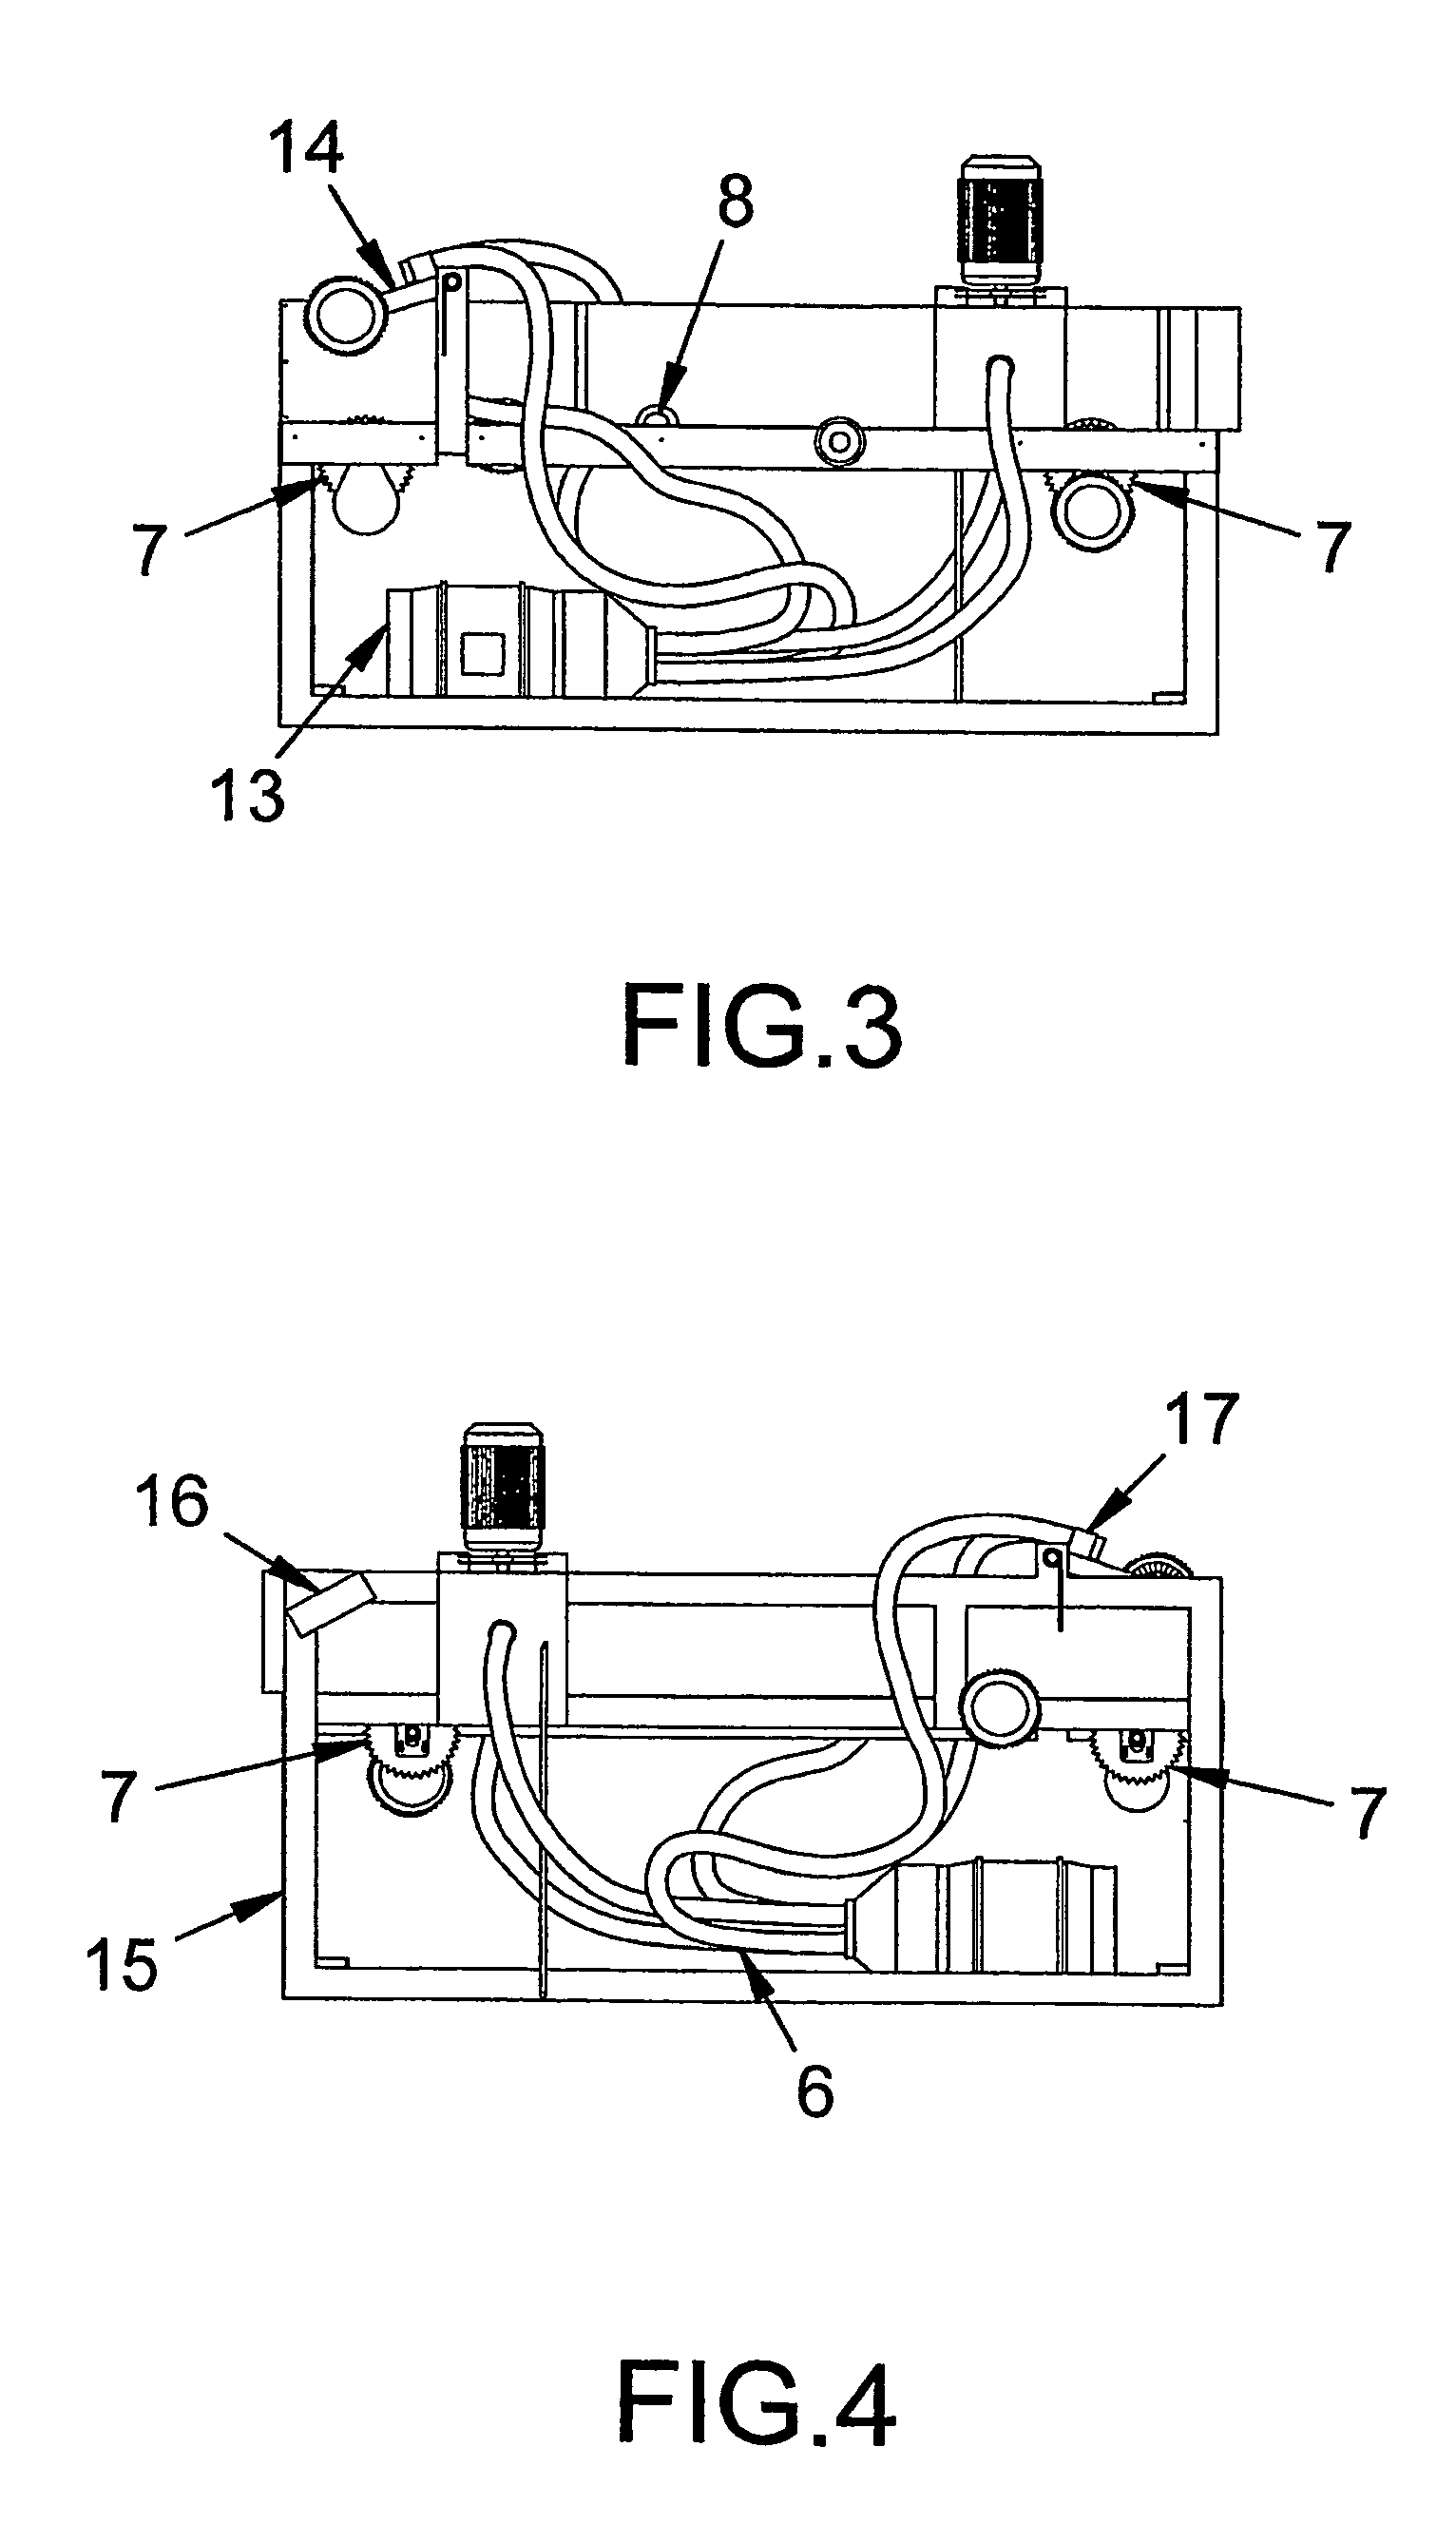 Mattress material removal device